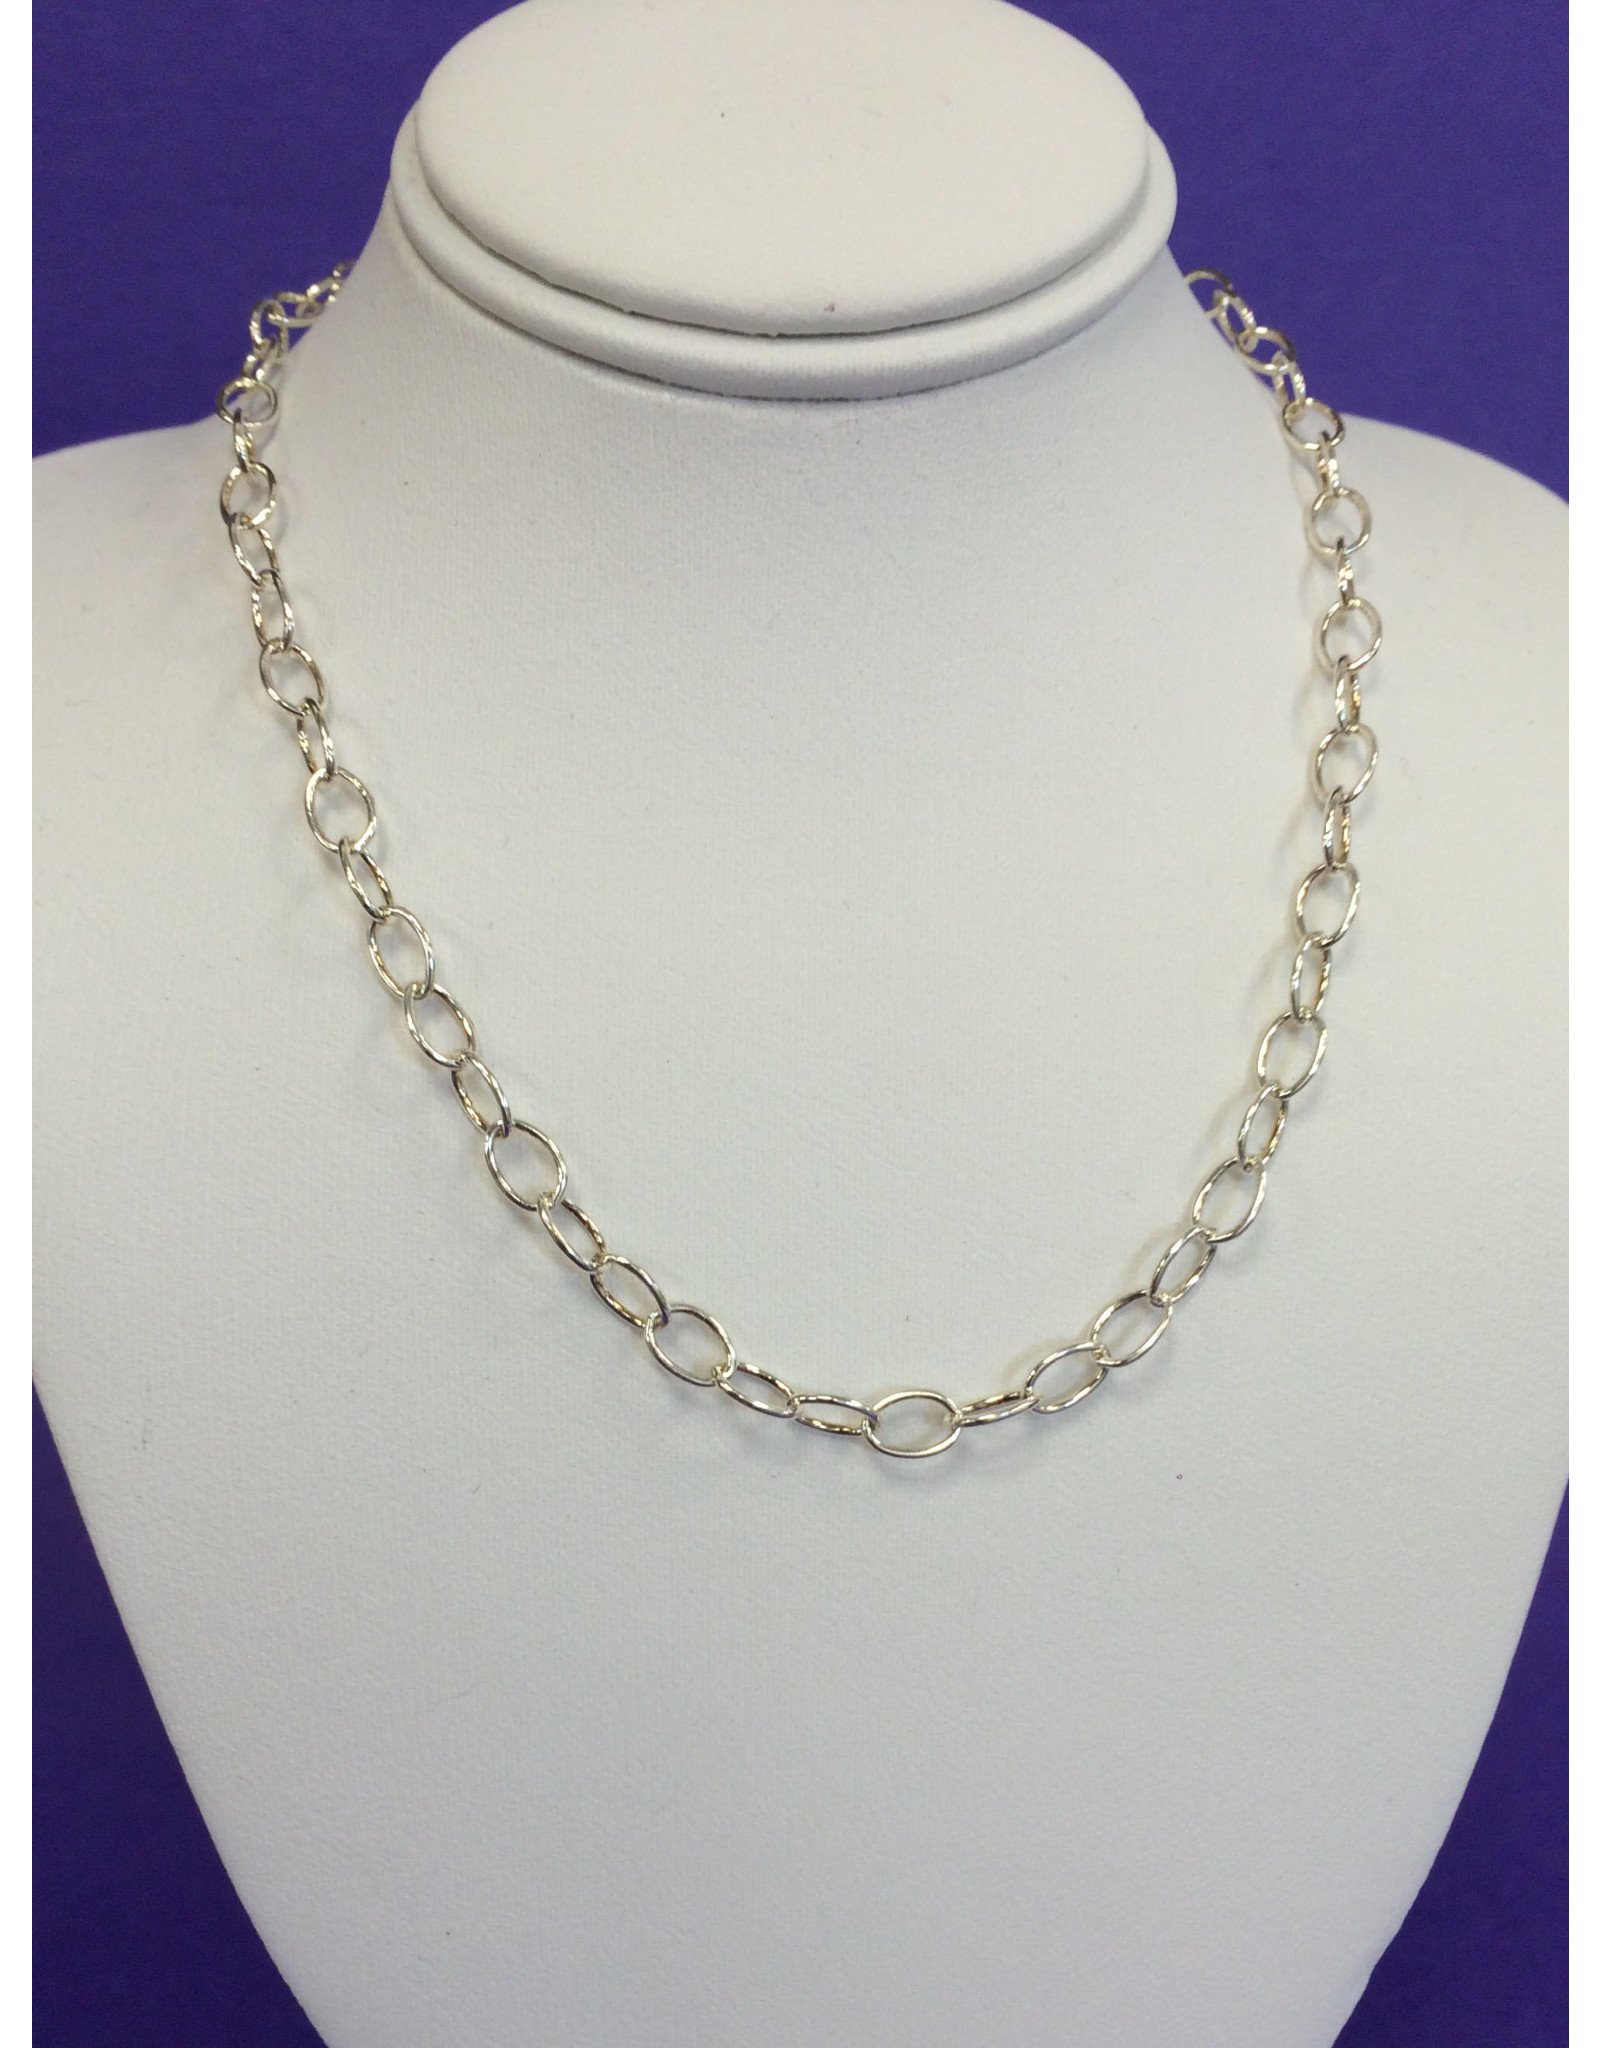 NECKLACE-SILVER OVAL LINK 18IN